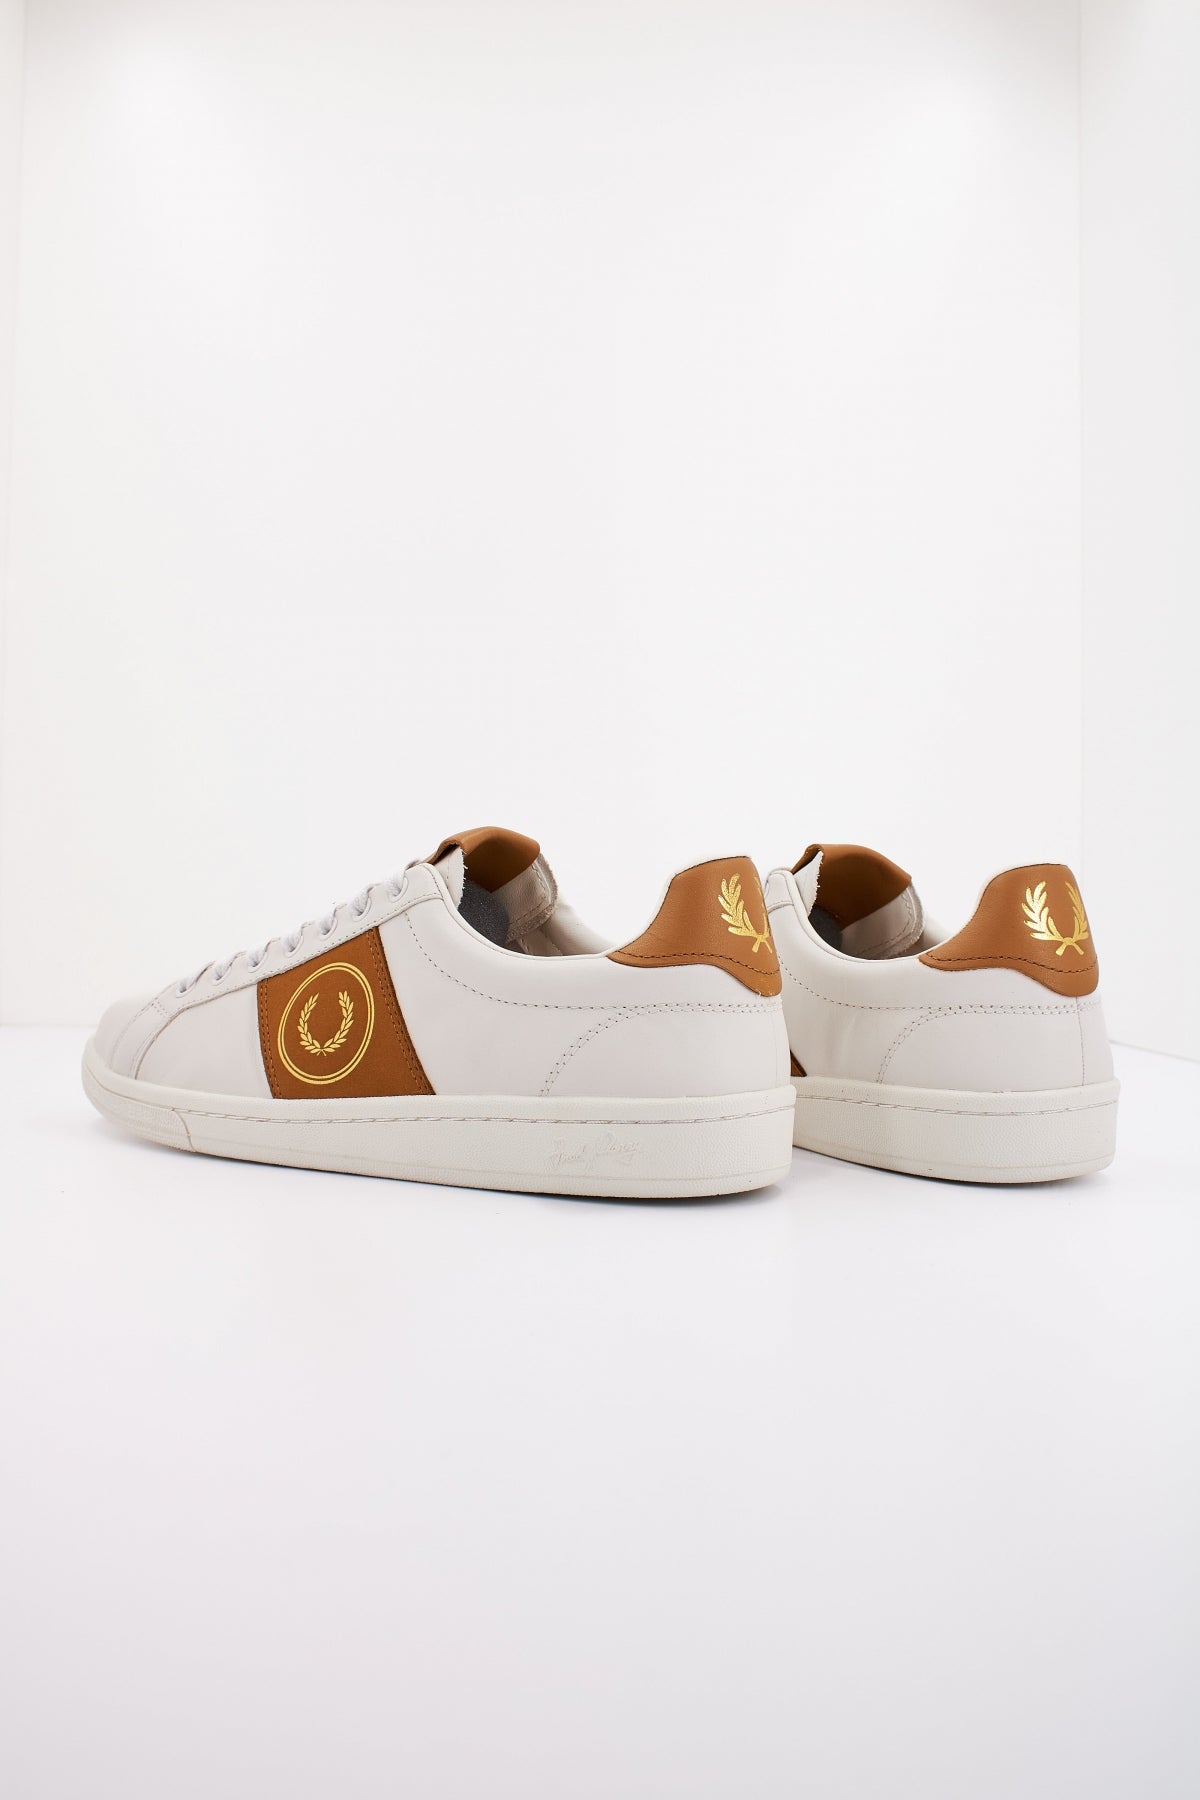 FRED PERRY B LEATHER/BRANDE en color BLANCO  (3)